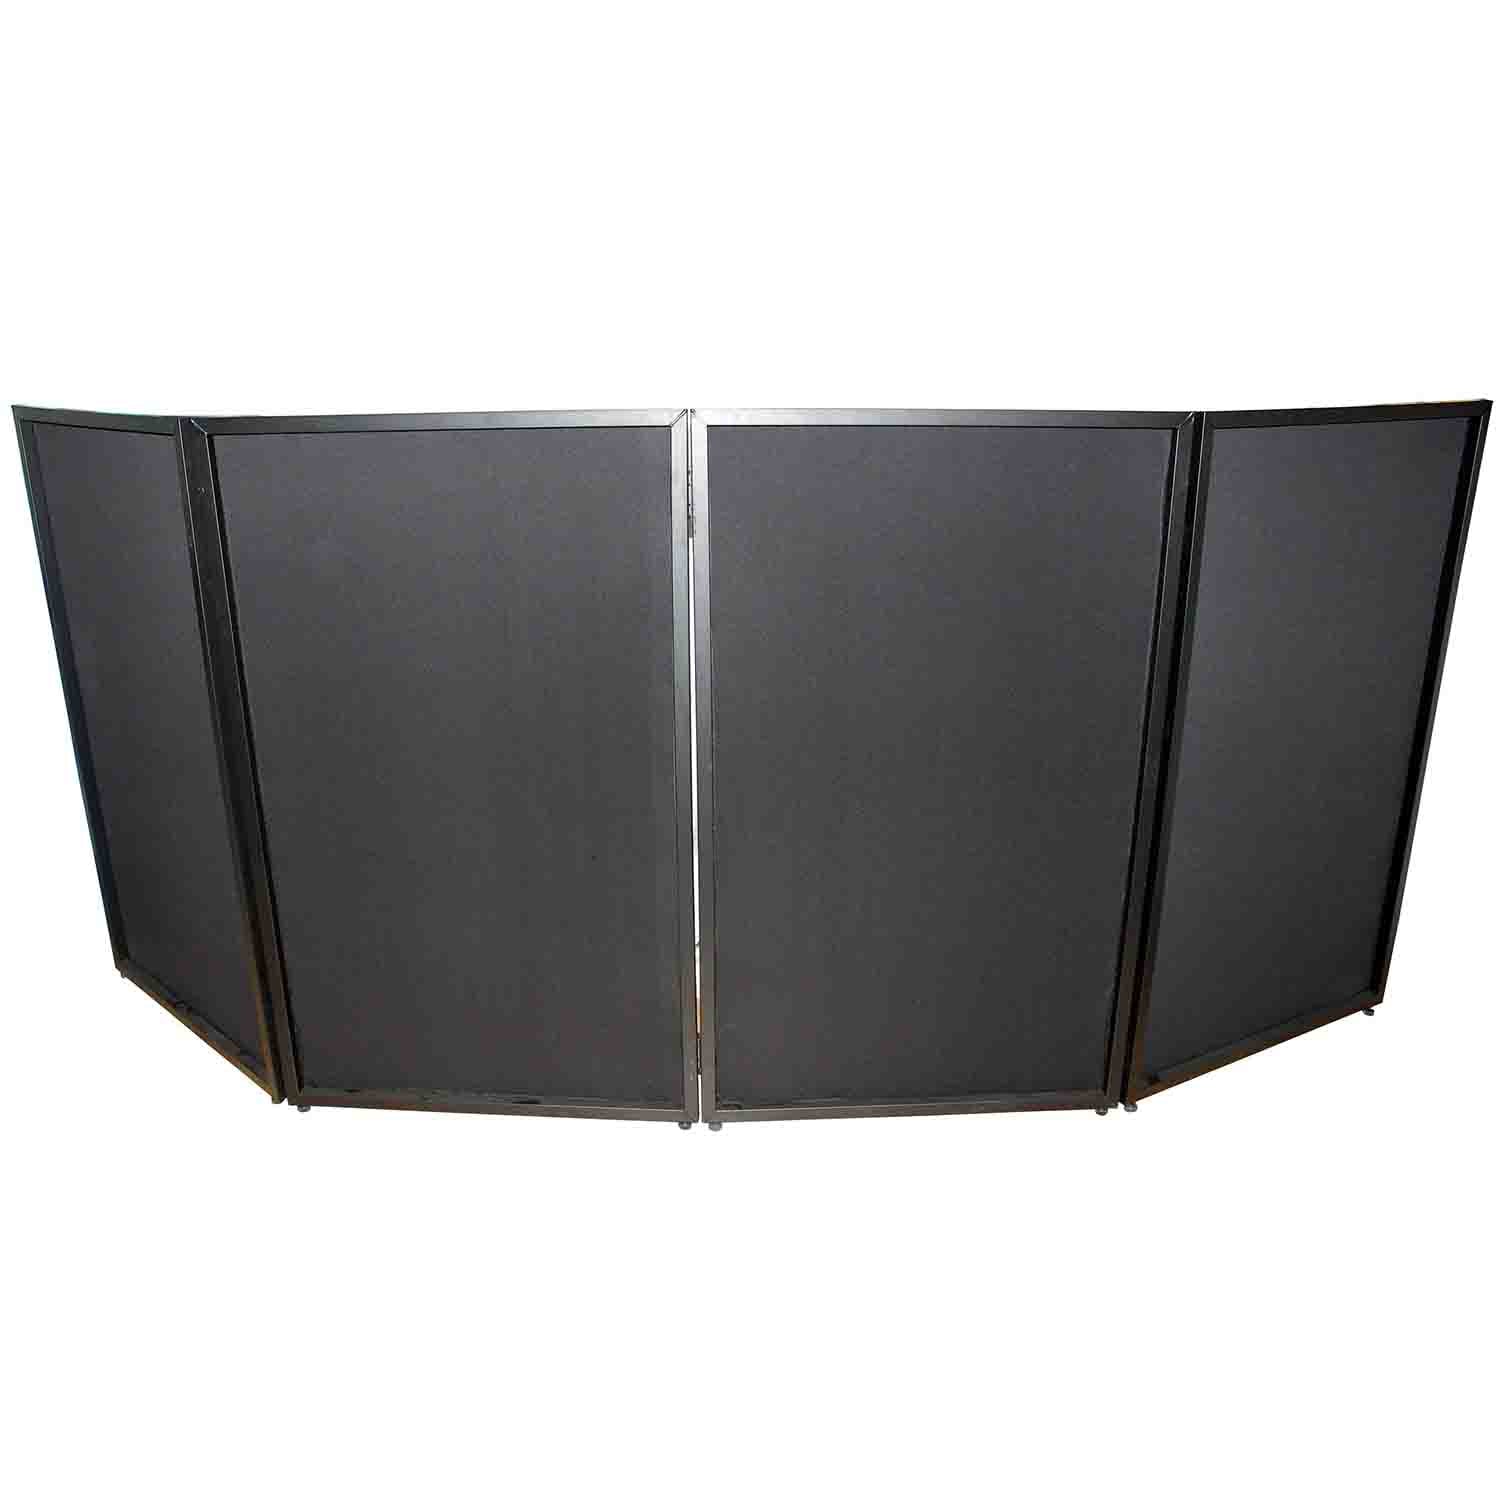 ProX XF-4X3048B MK2 Four Panel DJ Facade Black Collapse and Go Facade Panels with Carry Bag – Black/White Scrims - Hollywood DJ